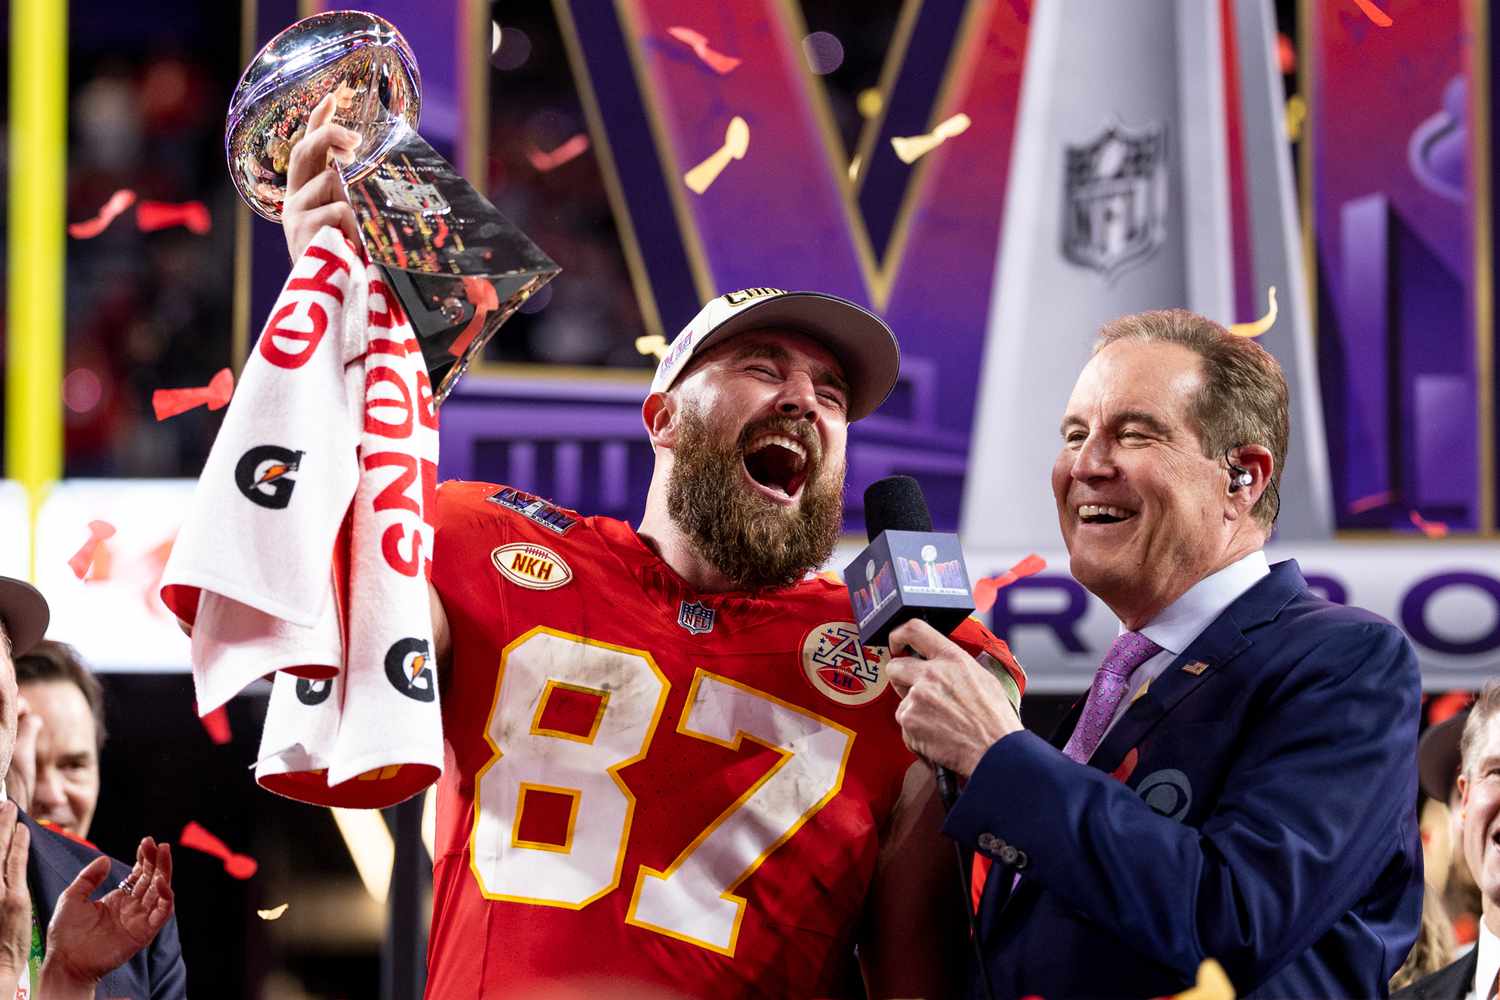 During one of his training sessions, Travis Kelce passionately shared with his devoted fans how he's been grinding in the offseason, driven by the singular goal of securing at least three more Super Bowl victories before hanging up his cleats.